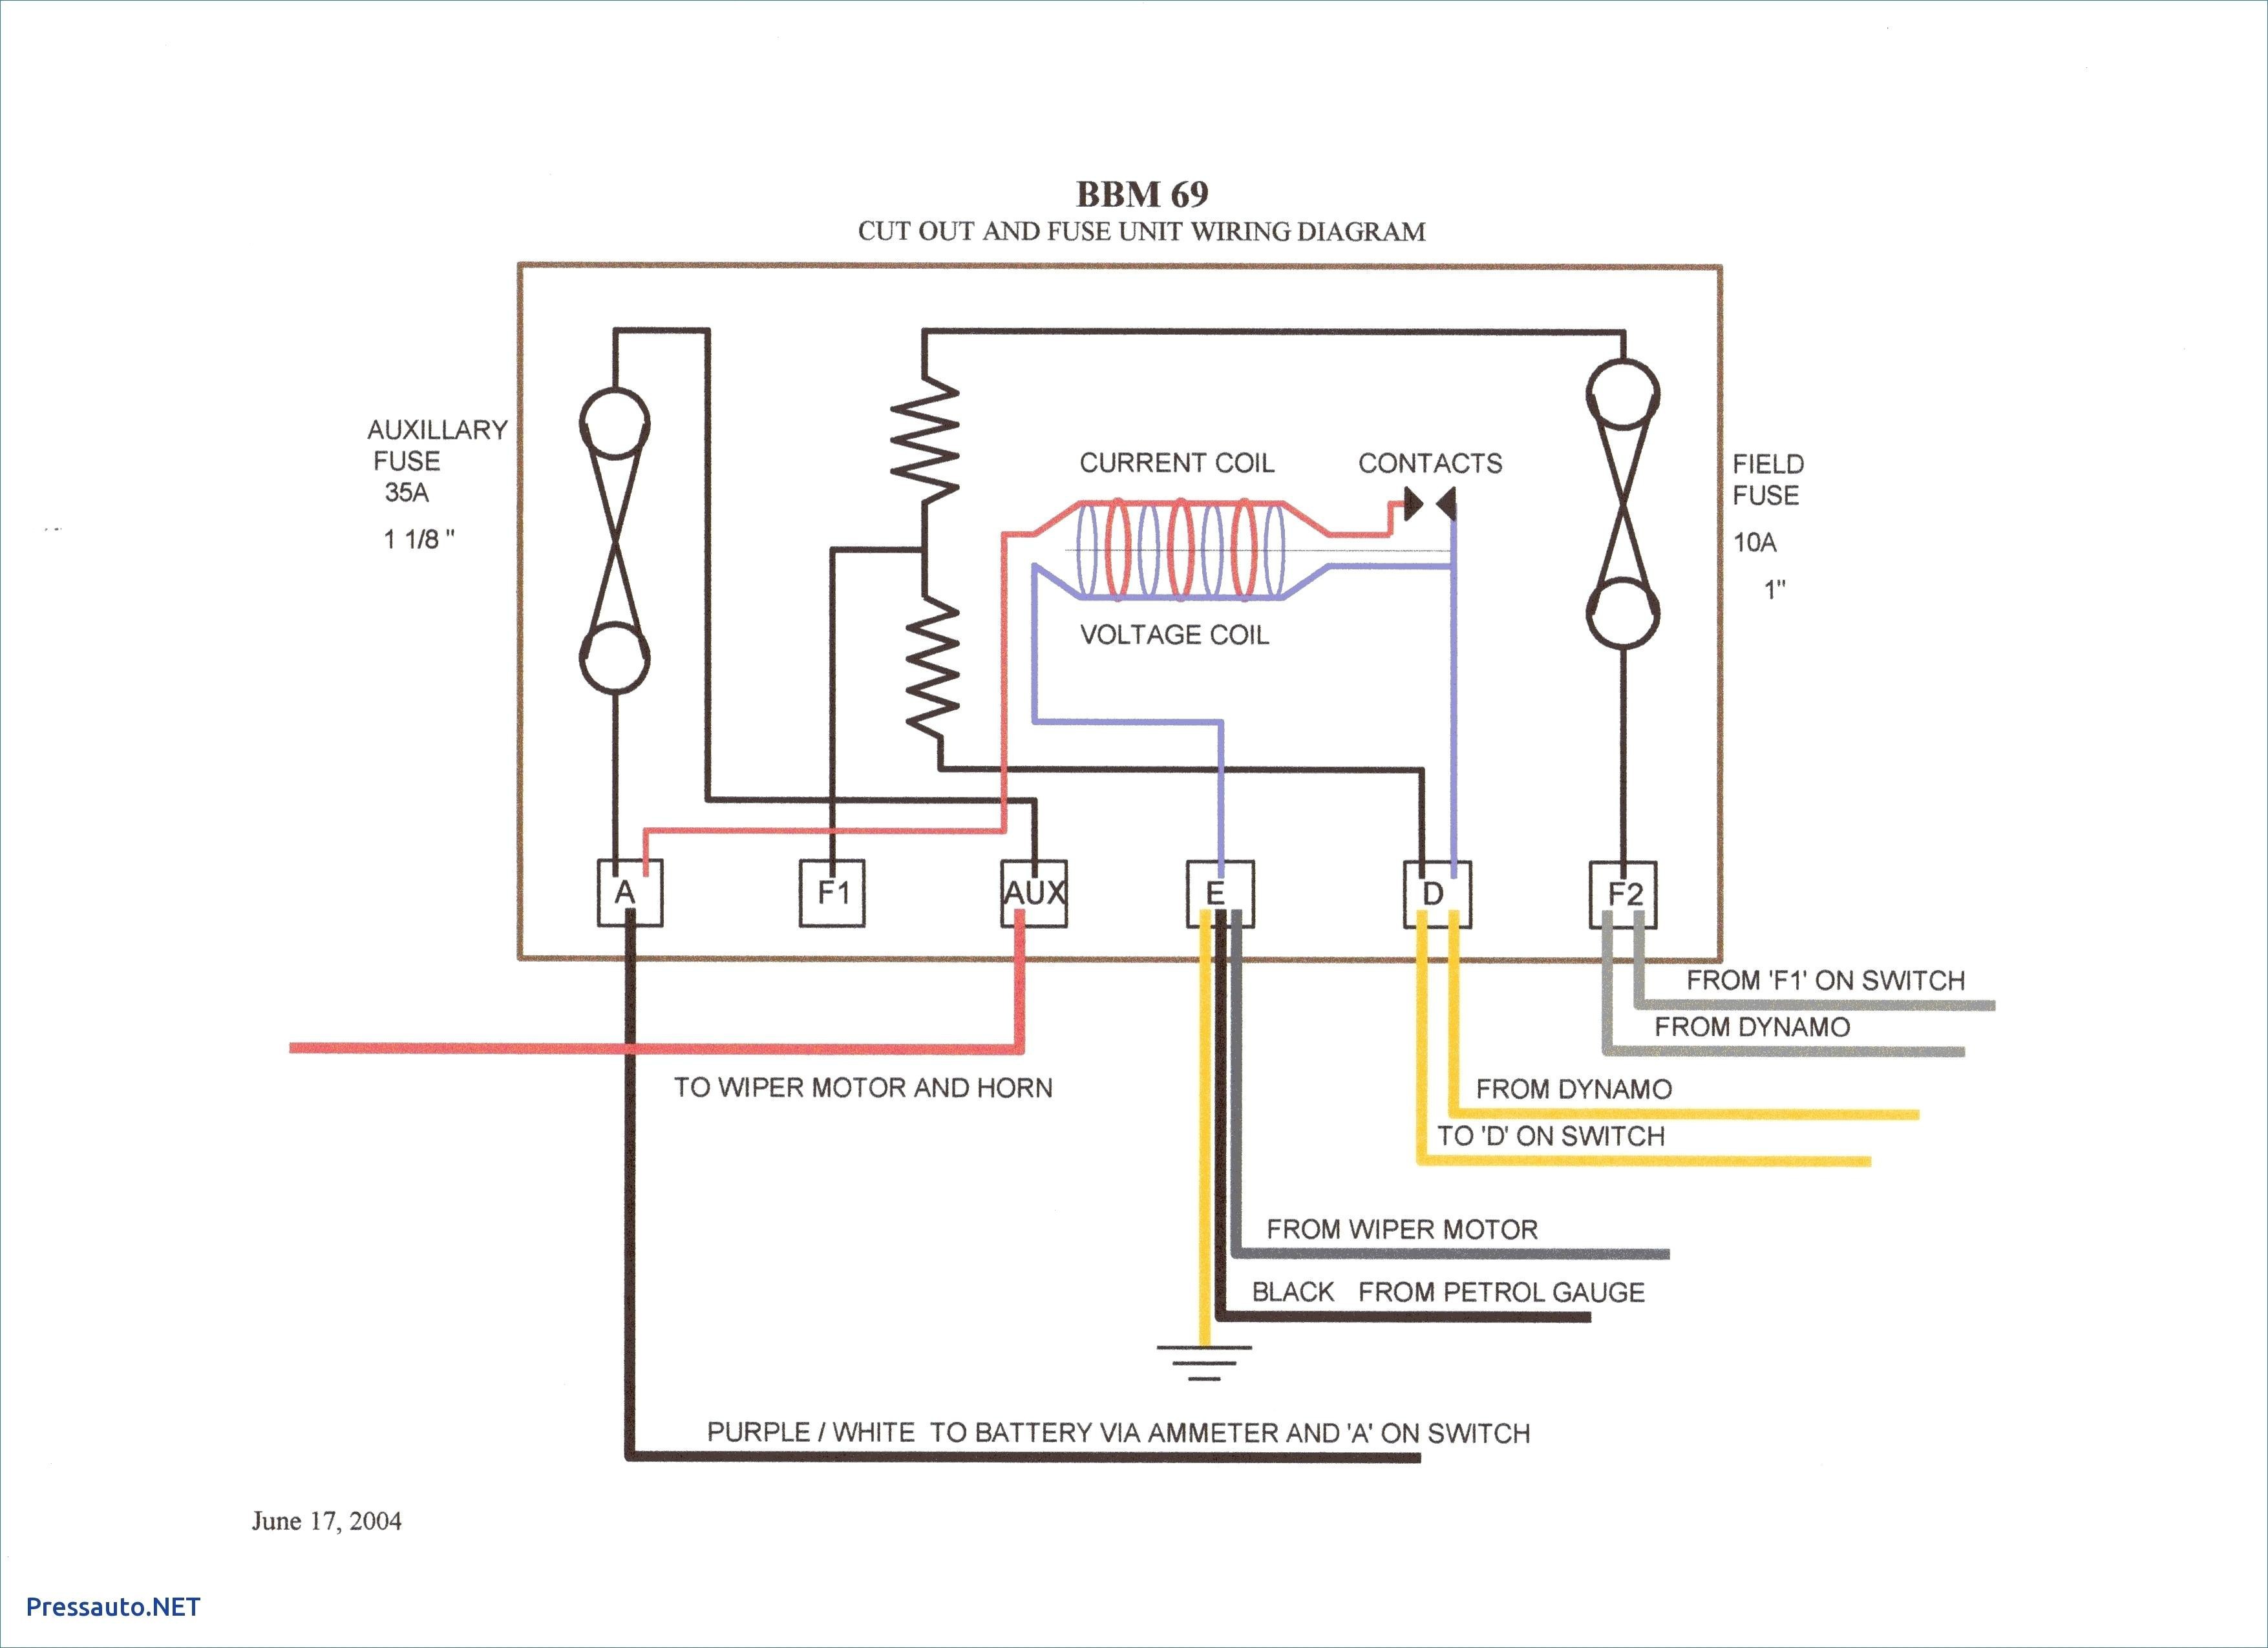 Wiring Diagram for Unvented Cylinder Fresh Water Heater Wiring Diagram Dual Element Best Hot Water Heater